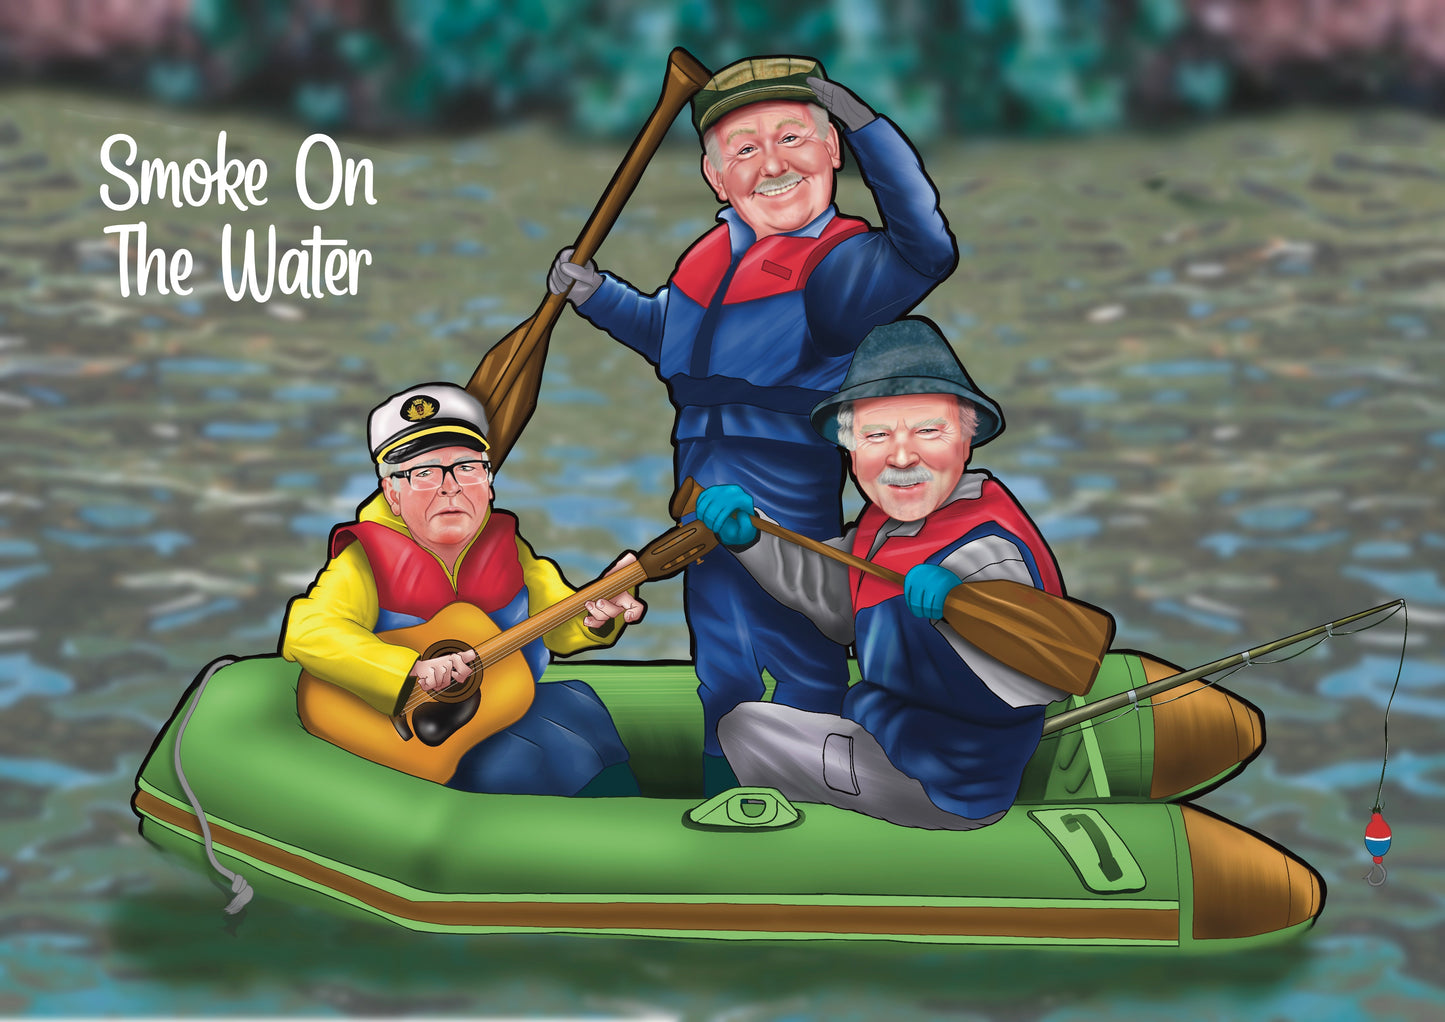 Still Game A4 Prints-Prints Auld Pals Jack & Victor & Winston smoke on the water spisode